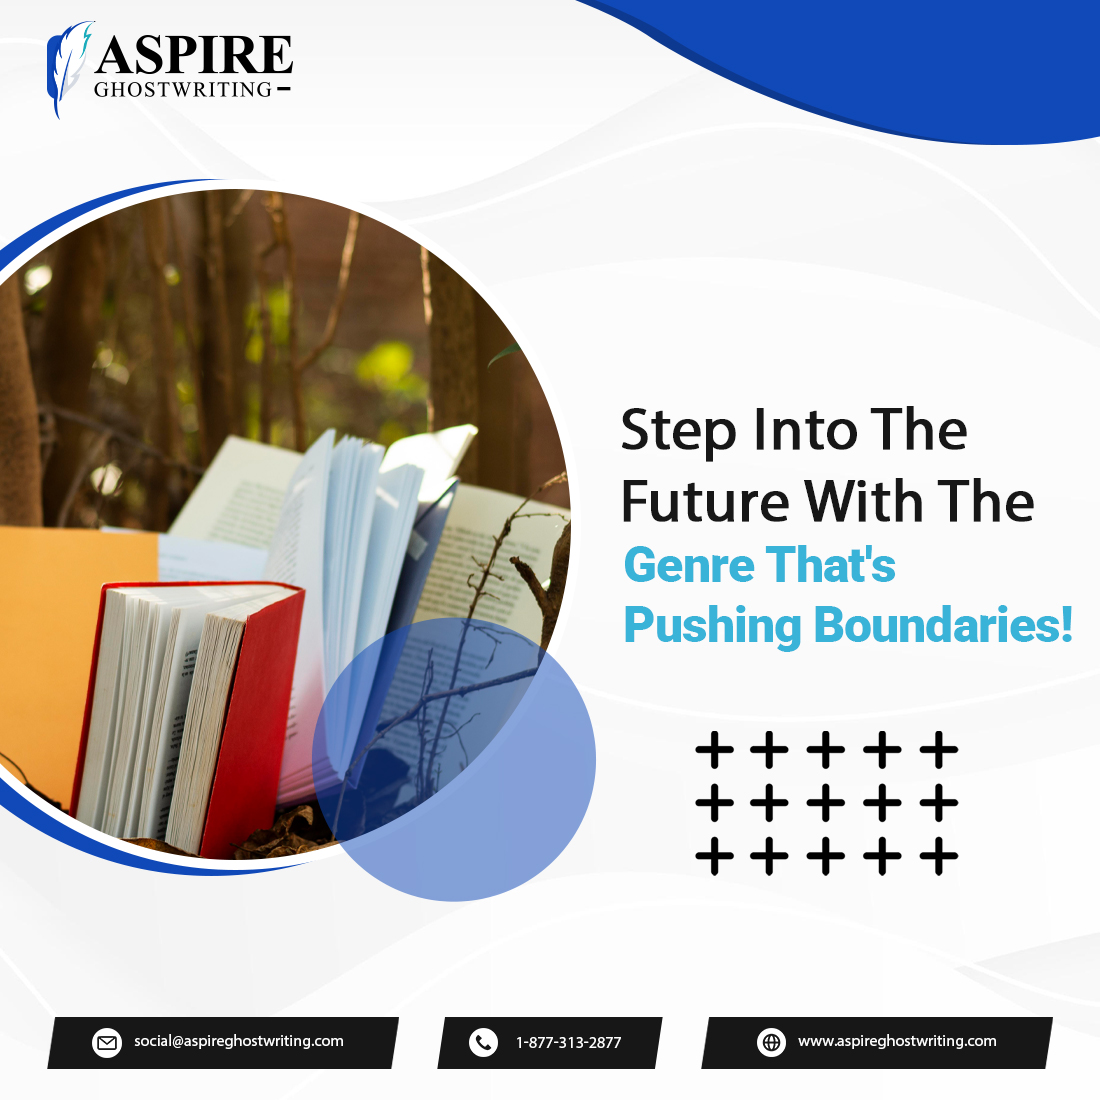 Science fiction opens the world to an imaginative future! Let's write your sci-fi adventure that amazes your audience.

#aspireghostwriting #lineediting #writingstyle #bookmarketing #bookpublishing #bookwriting #scifi